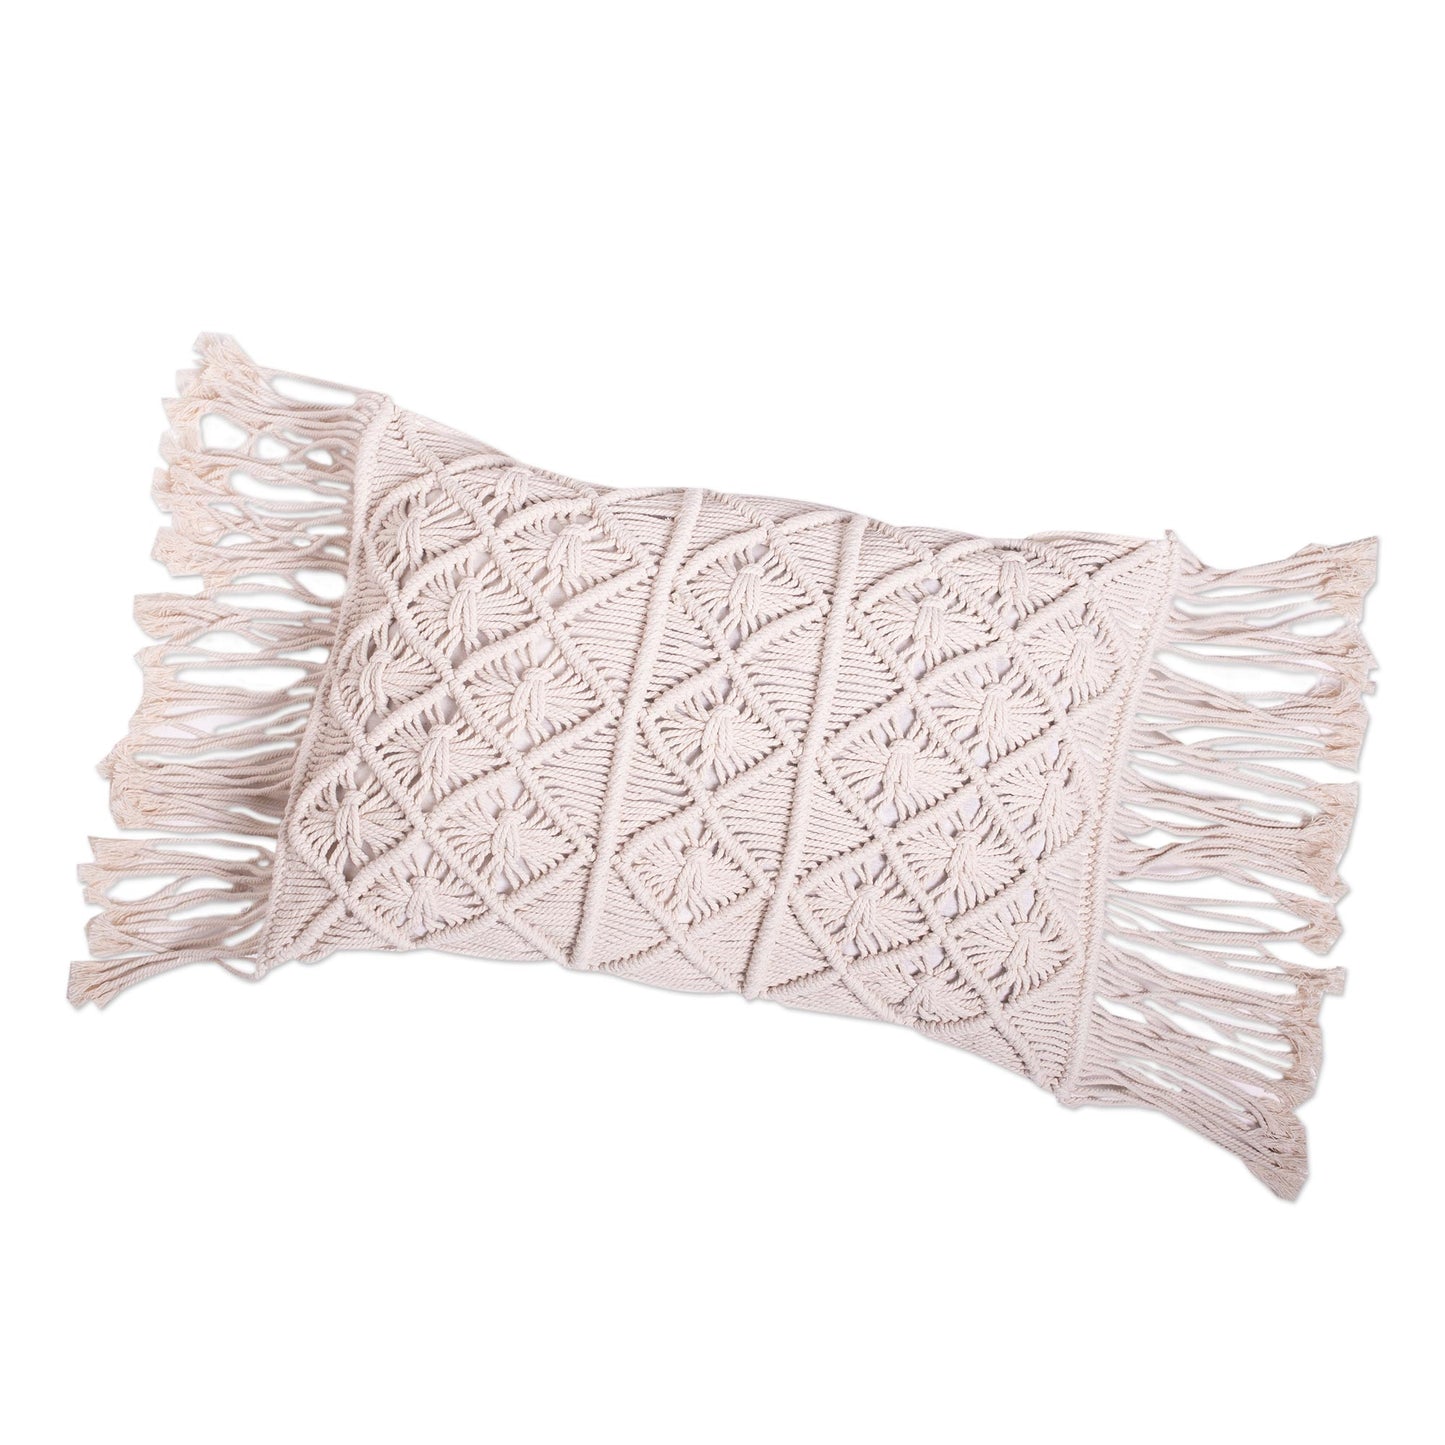 Cuddle Party Cotton Macrame Cushion Cover